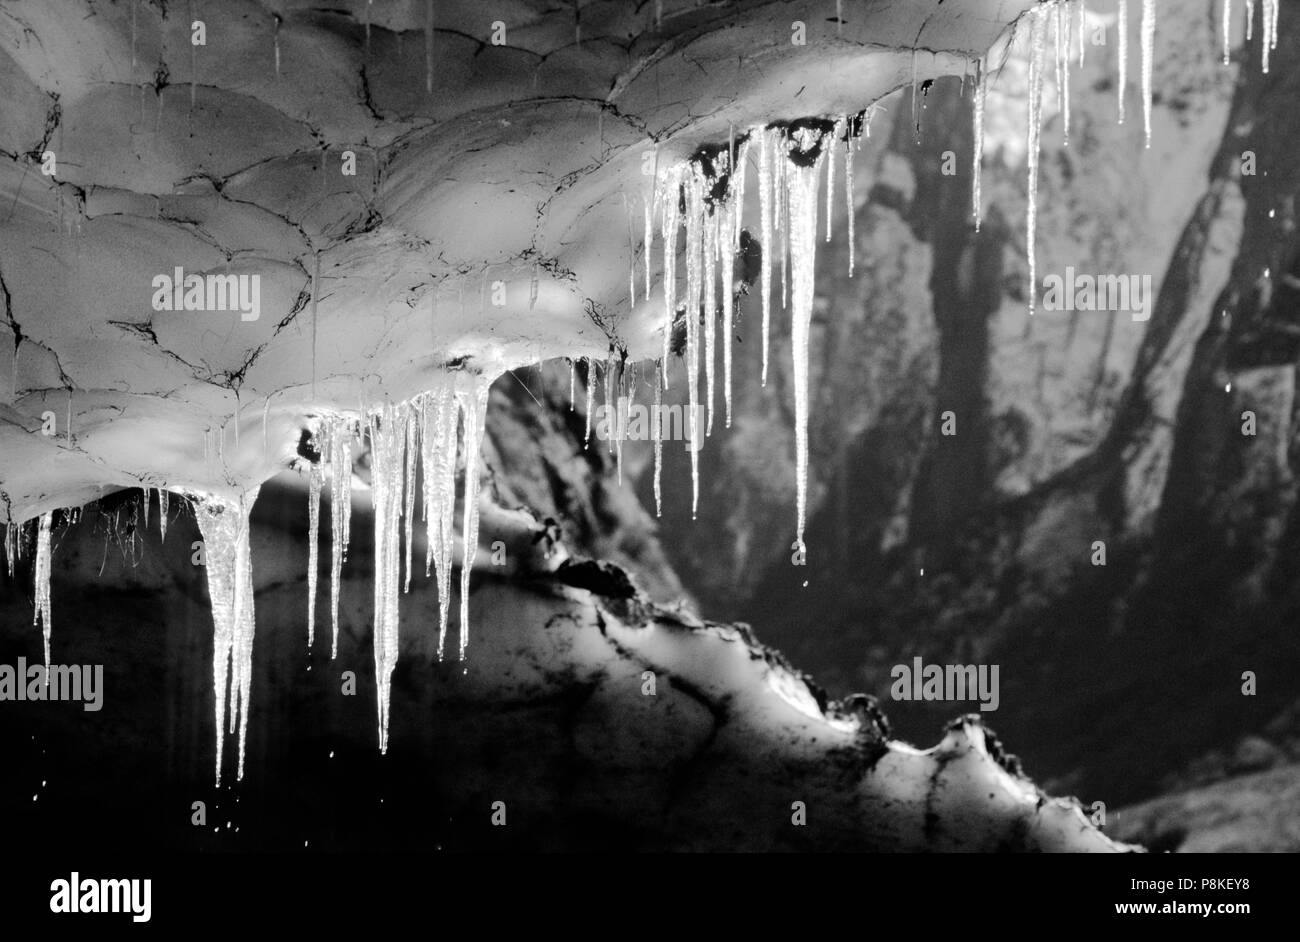 Sunlight illuminates WATER DRIPPING from ICICLES on the ceiling of a SNOW CAVE - ANNAPURNA SANCTUARY, NEPAL Stock Photo